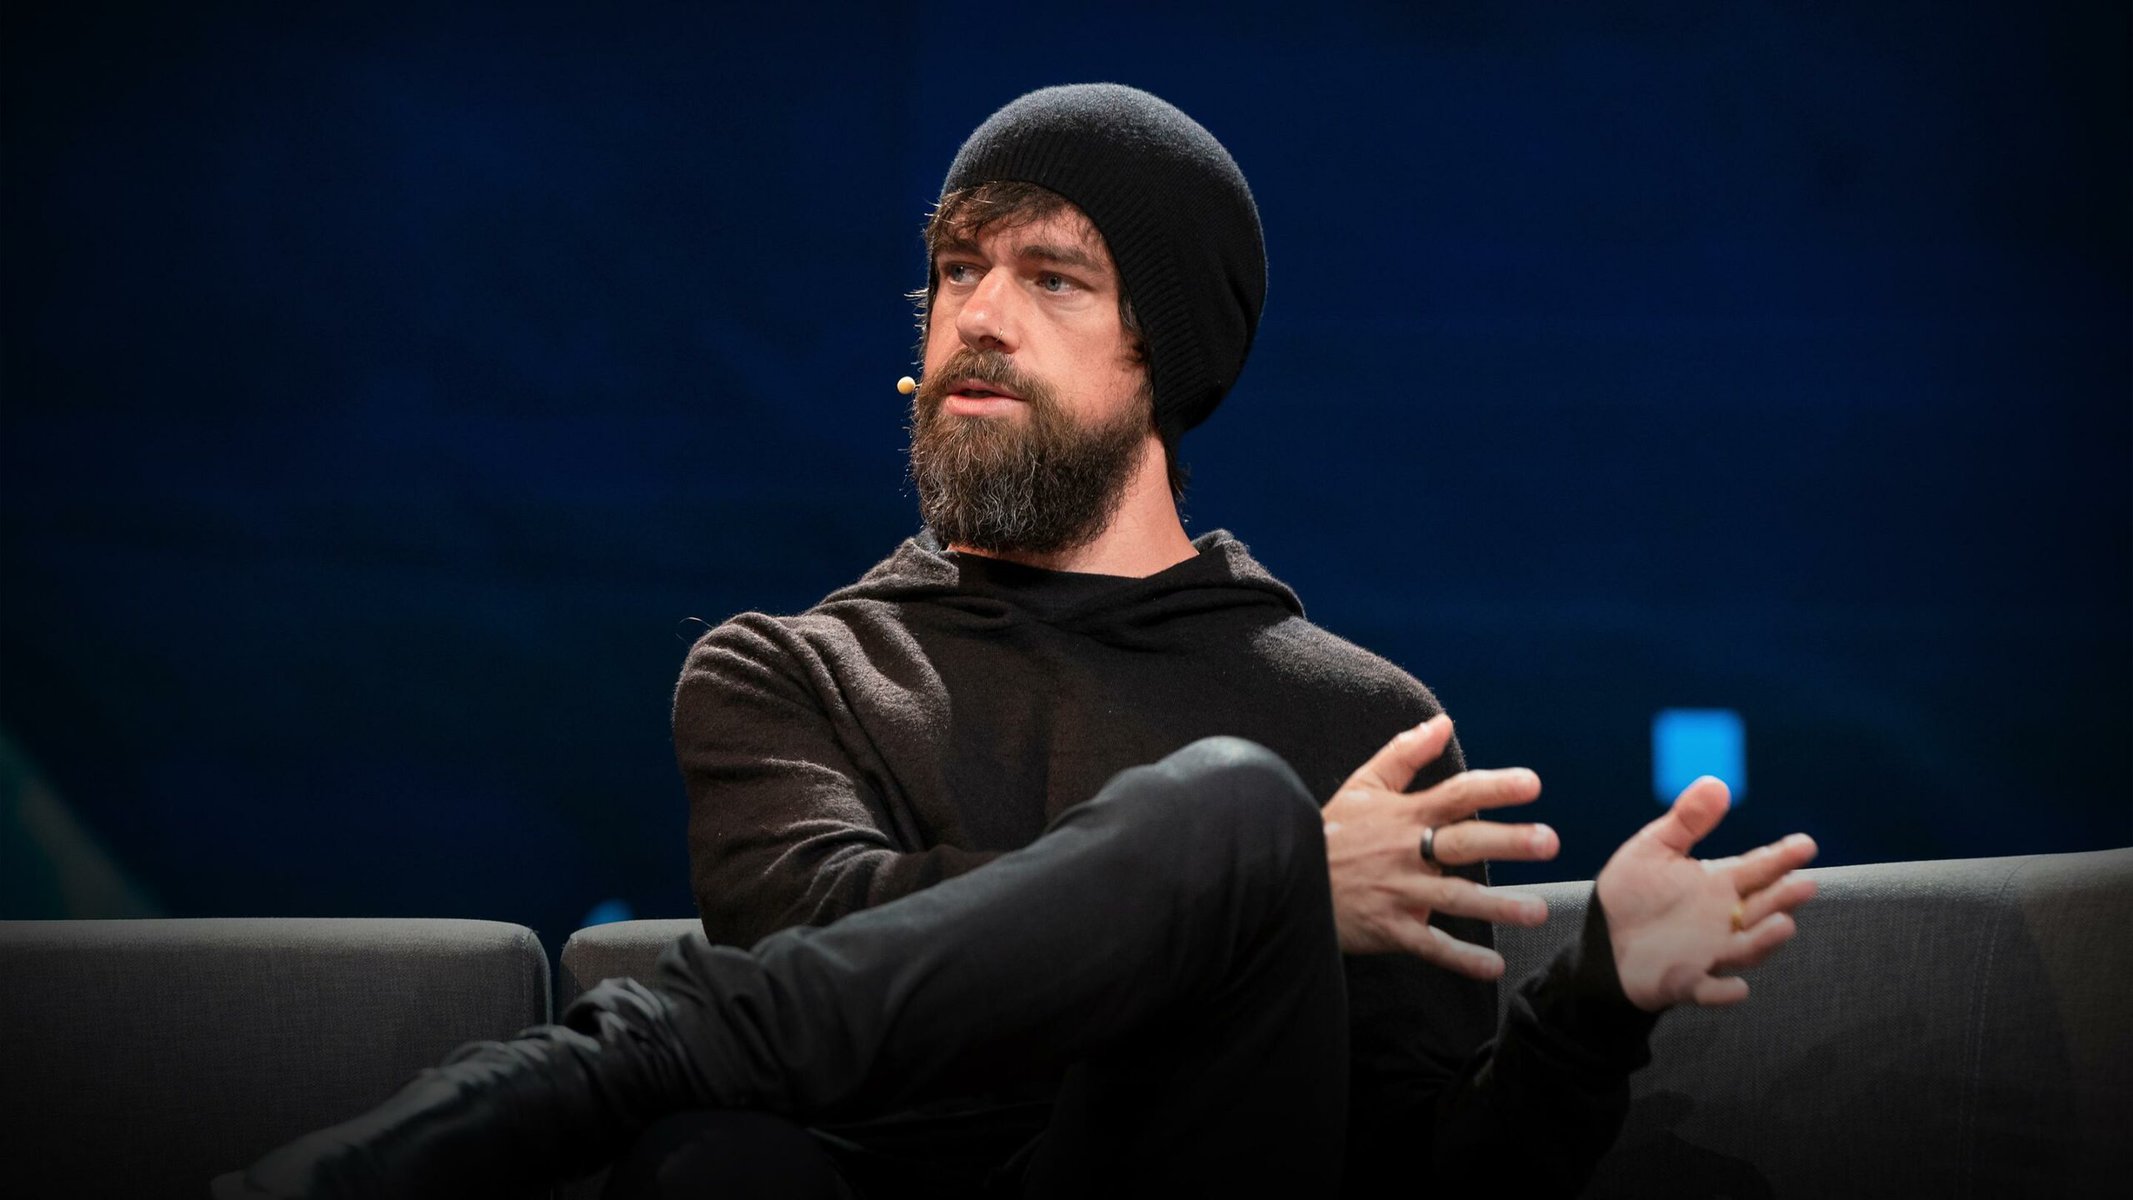 jackdorsey 2019 embed scaled